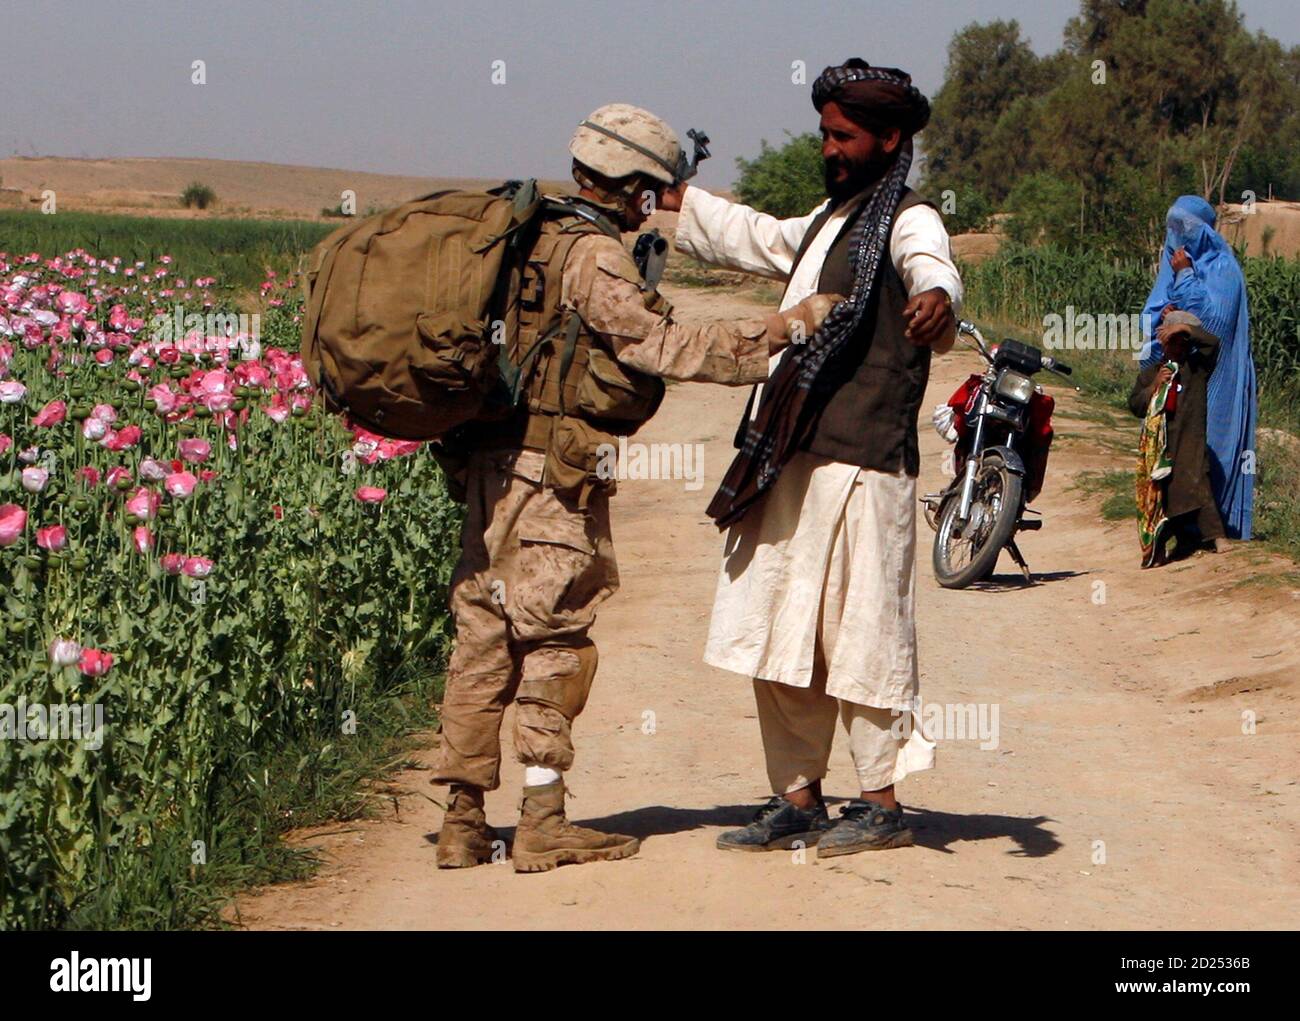 A U.S. Marine from Lima company 3rd Battalion 6th Marine Regiment searches an Afghan man as they patrol in Karez-e-Sayyidi, in Helmand province, April 5, 2010. REUTERS/Asmaa Waguih  (AFGHANISTAN - Tags: CIVIL UNREST MILITARY CONFLICT) Stock Photo